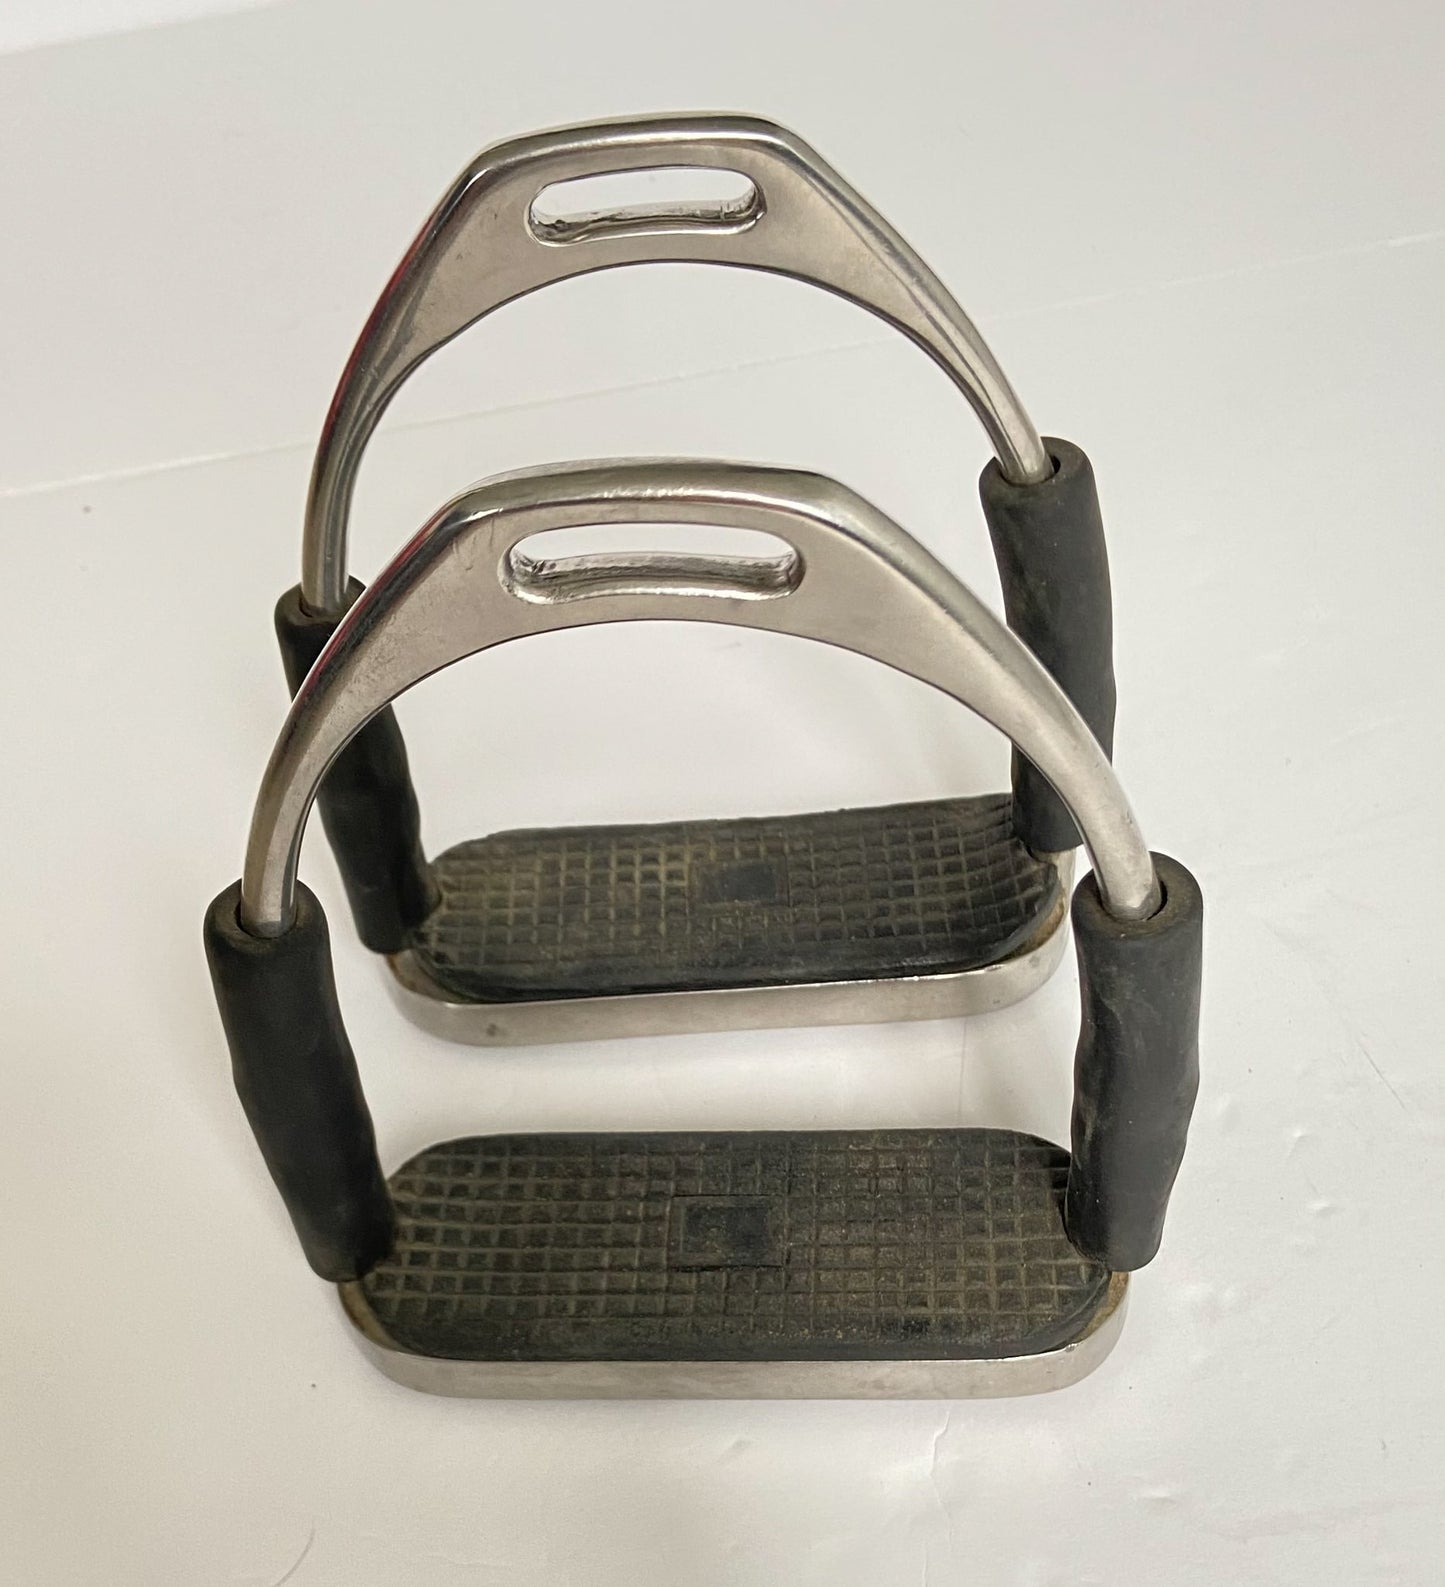 Stainless Steel Articulated Stirrups - Silver - 4.5"